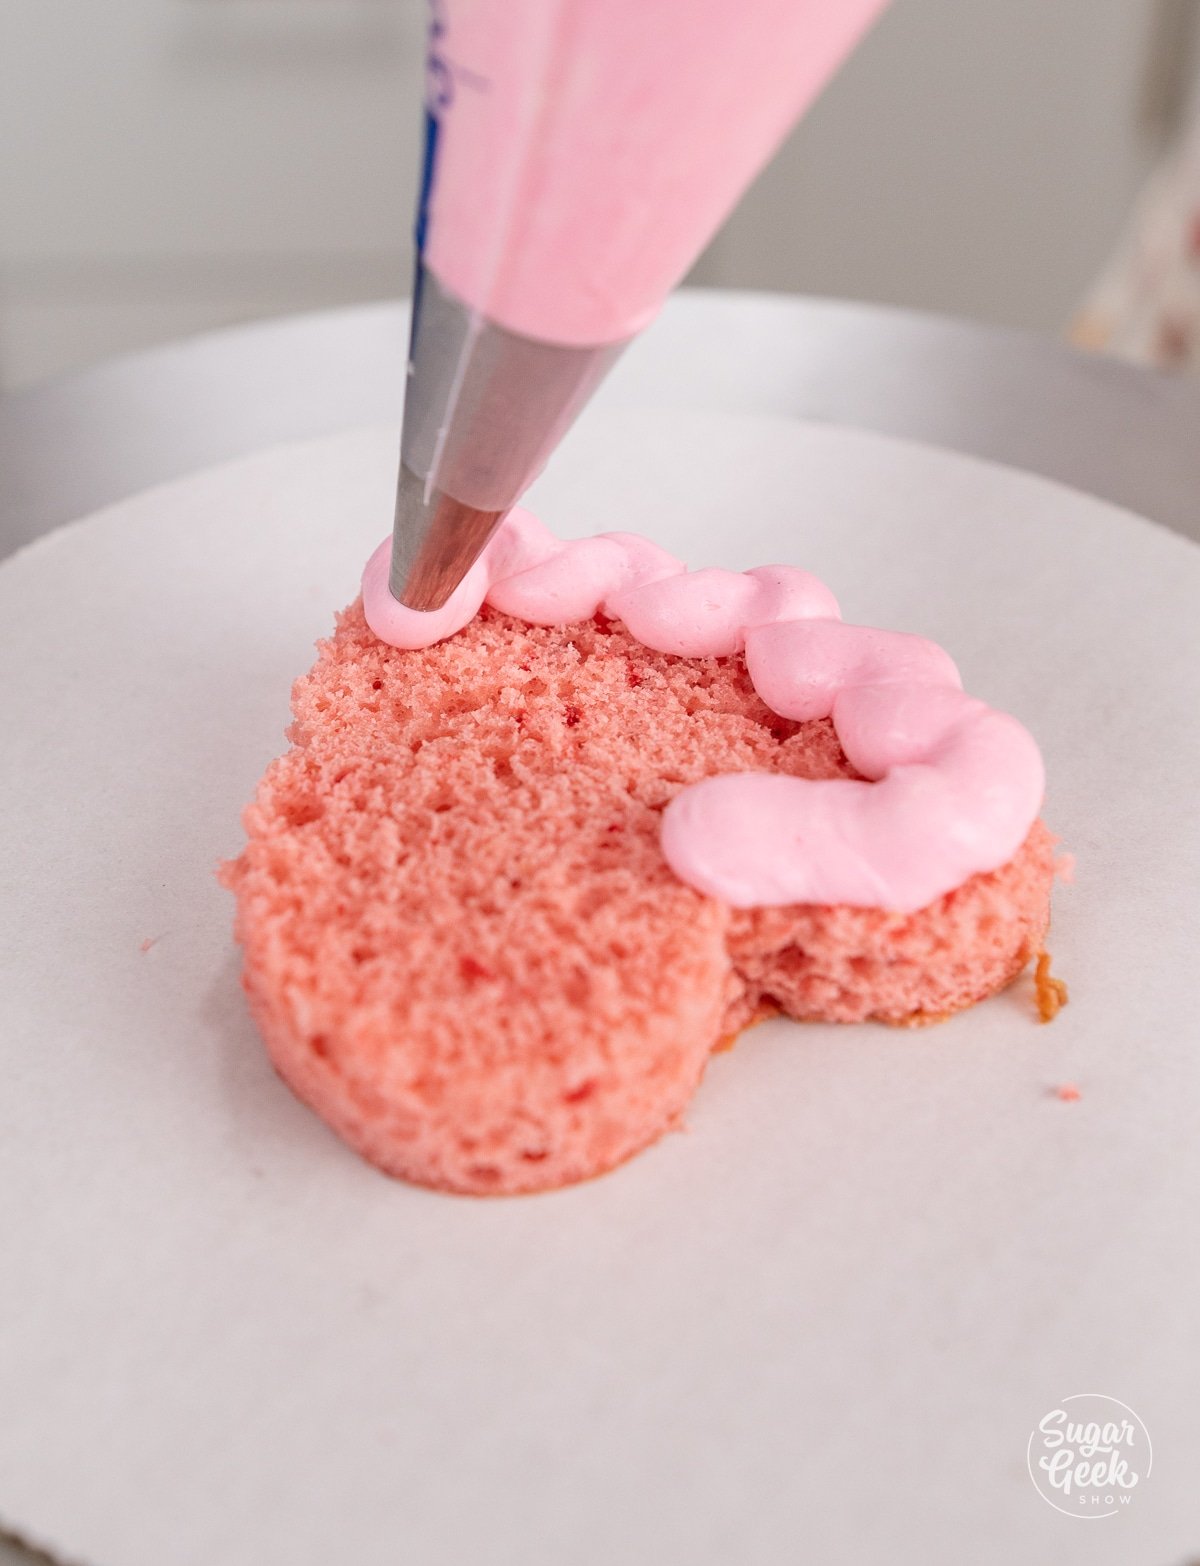 piping bag making a dam of buttercream on a heart cake